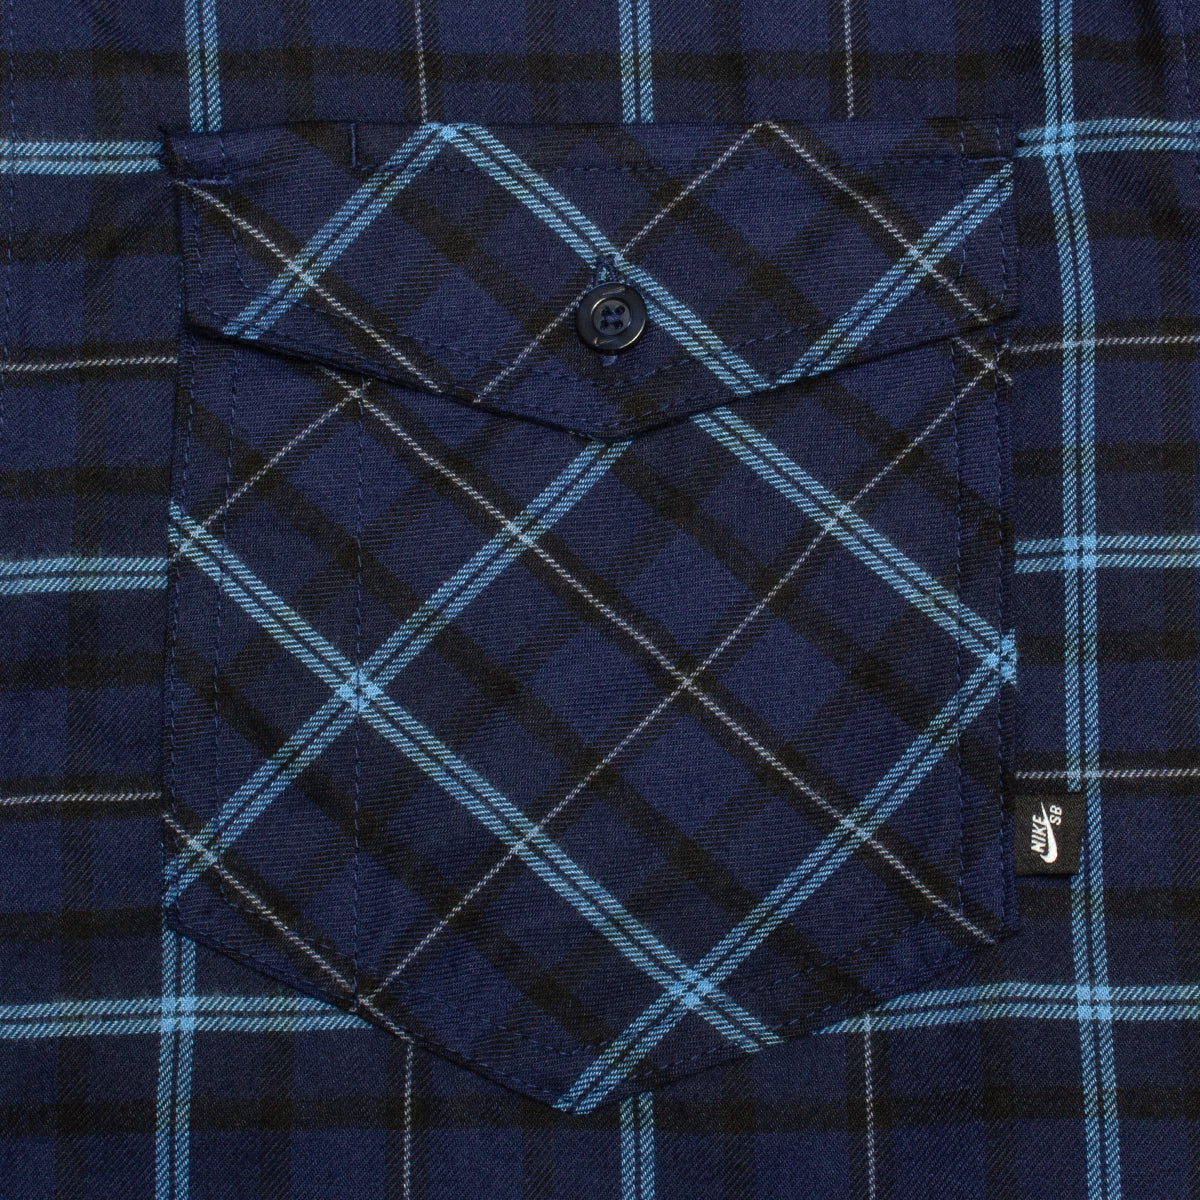 Nike SB | L/S Flannel Button-Up Shirt Style # FN2567-410 Color : Midnight Navy / Obsidian